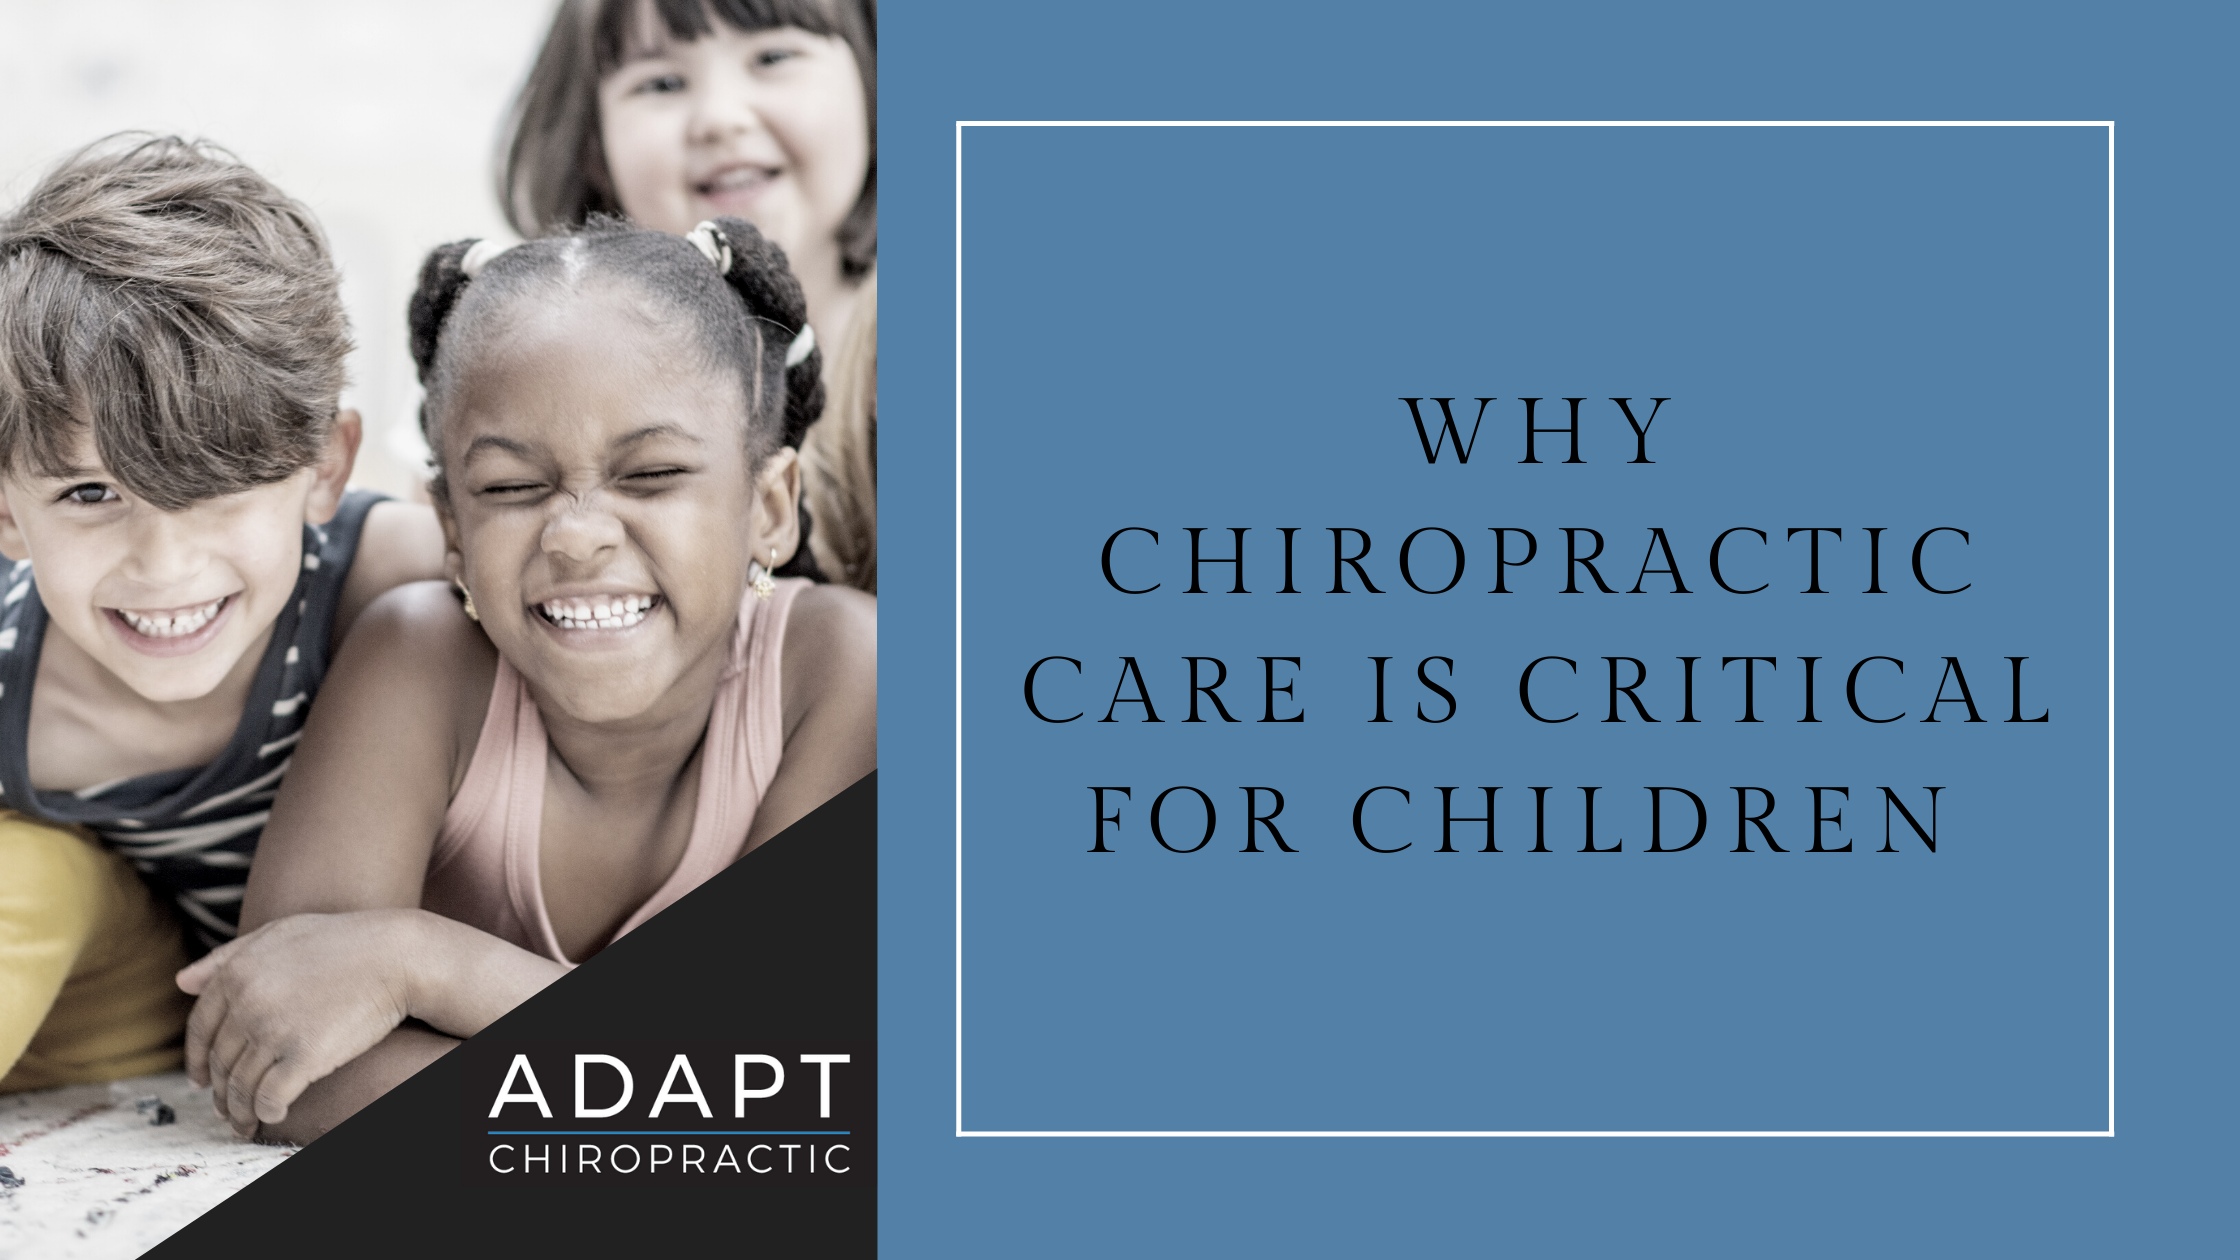 Why Chiropractic Care is Critical for Children